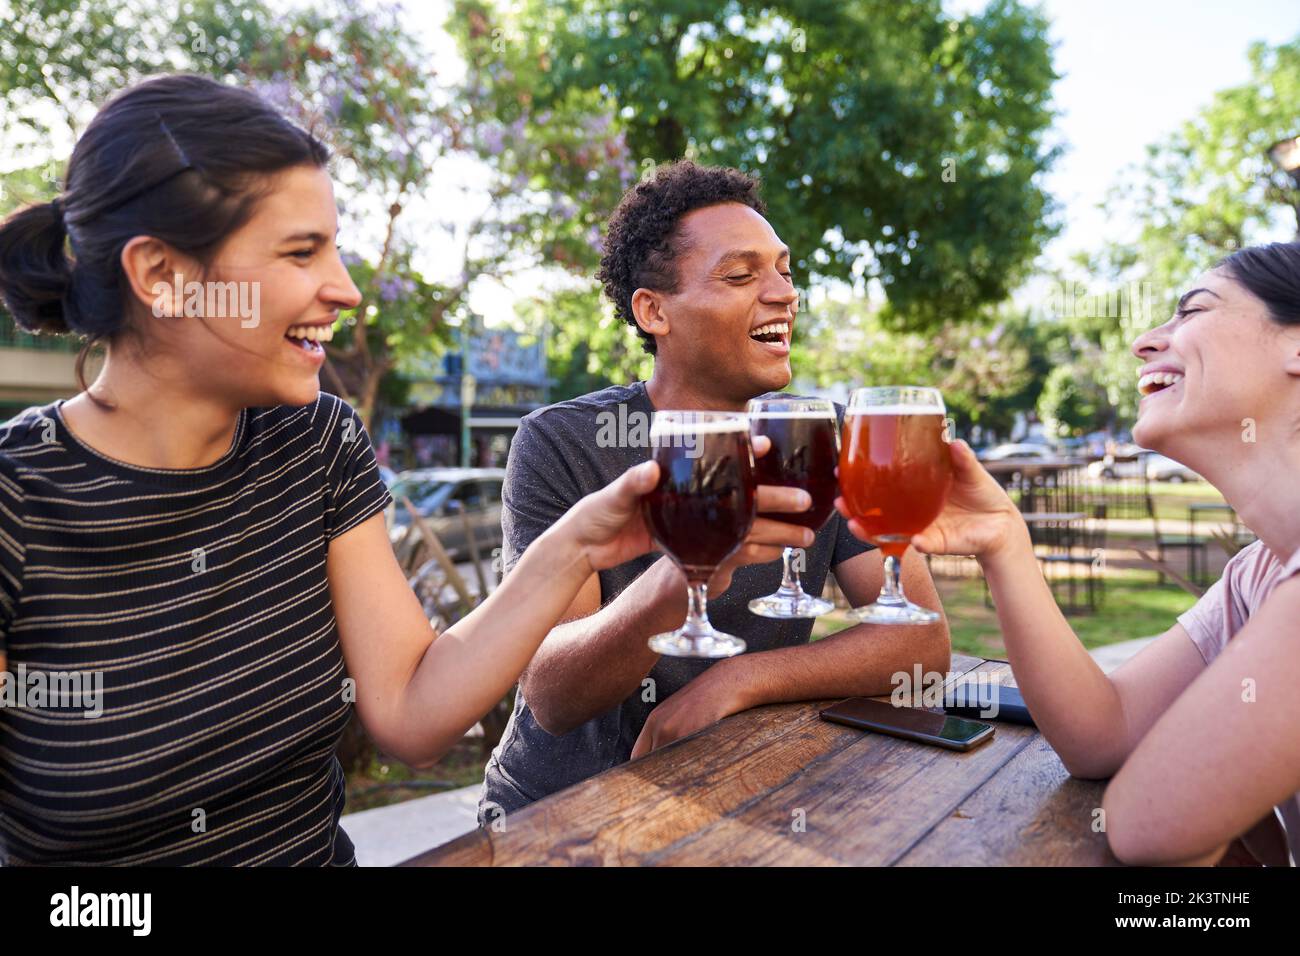 Mid-shot of ethnically diverse group of friends celebrating and making a toast while drinking homebrewed beer Stock Photo